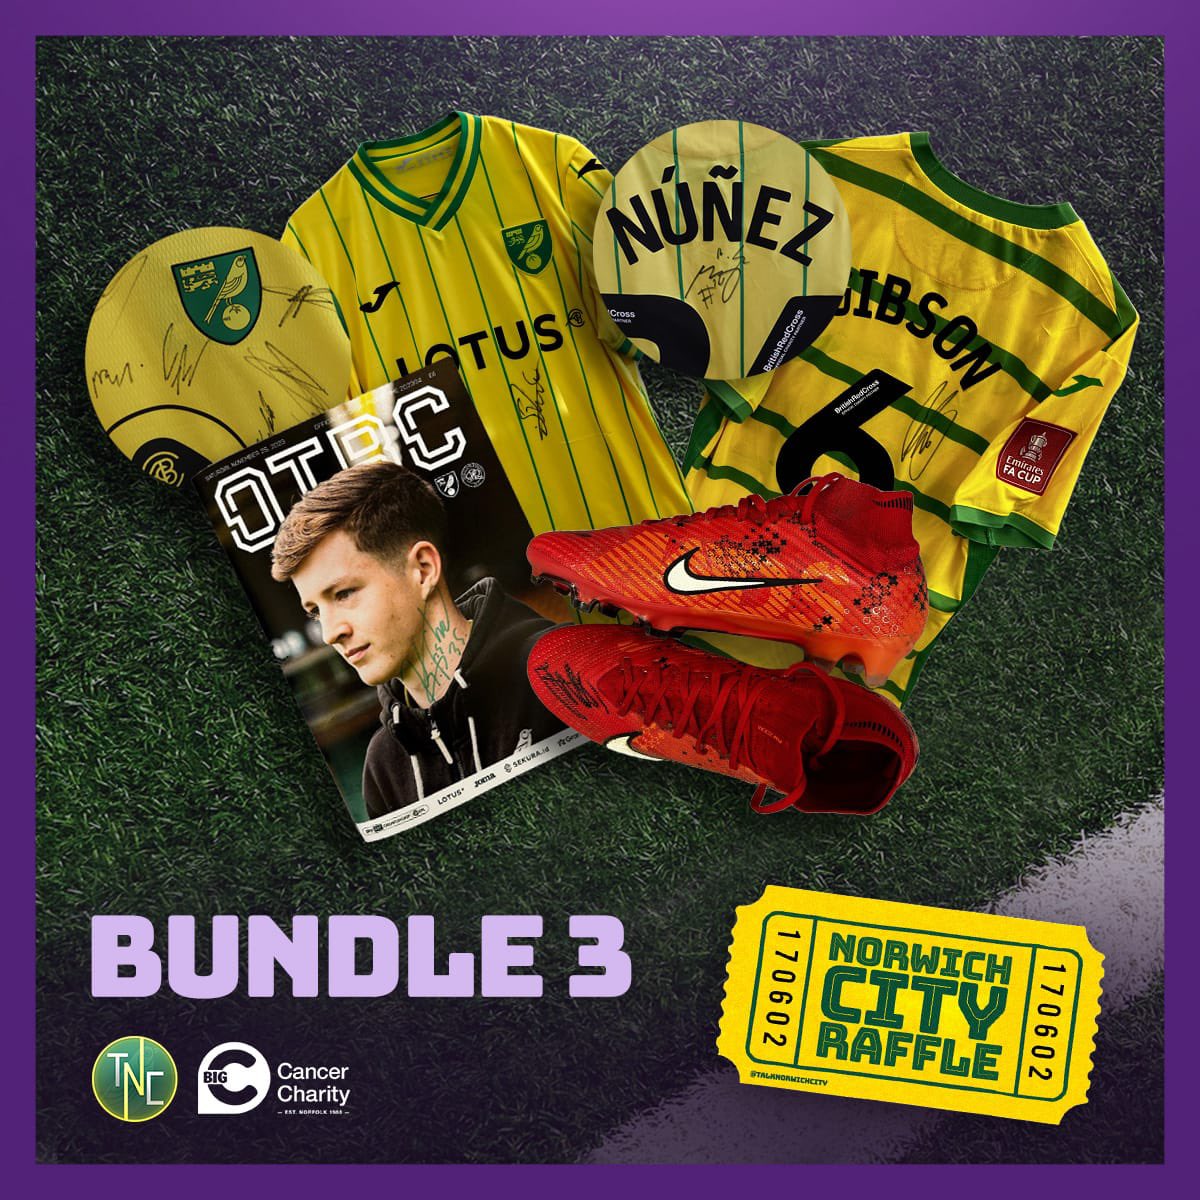 🚨 𝗧𝗵𝗲 𝗨𝗹𝘁𝗶𝗺𝗮𝘁𝗲 𝗡𝗼𝗿𝘄𝗶𝗰𝗵 𝗖𝗶𝘁𝘆 𝗥𝗮𝗳𝗳𝗹𝗲 🤩 1️⃣, 2️⃣ or 3️⃣ - which special #NCFC bundle do you want to win?! You have a chance by donating now! ⤵️ 🎫 big-c.charityhive.co.uk Every pound raised goes to @bigctweets.🎗️ PS. Look who’s boots are in 3️⃣ 👀